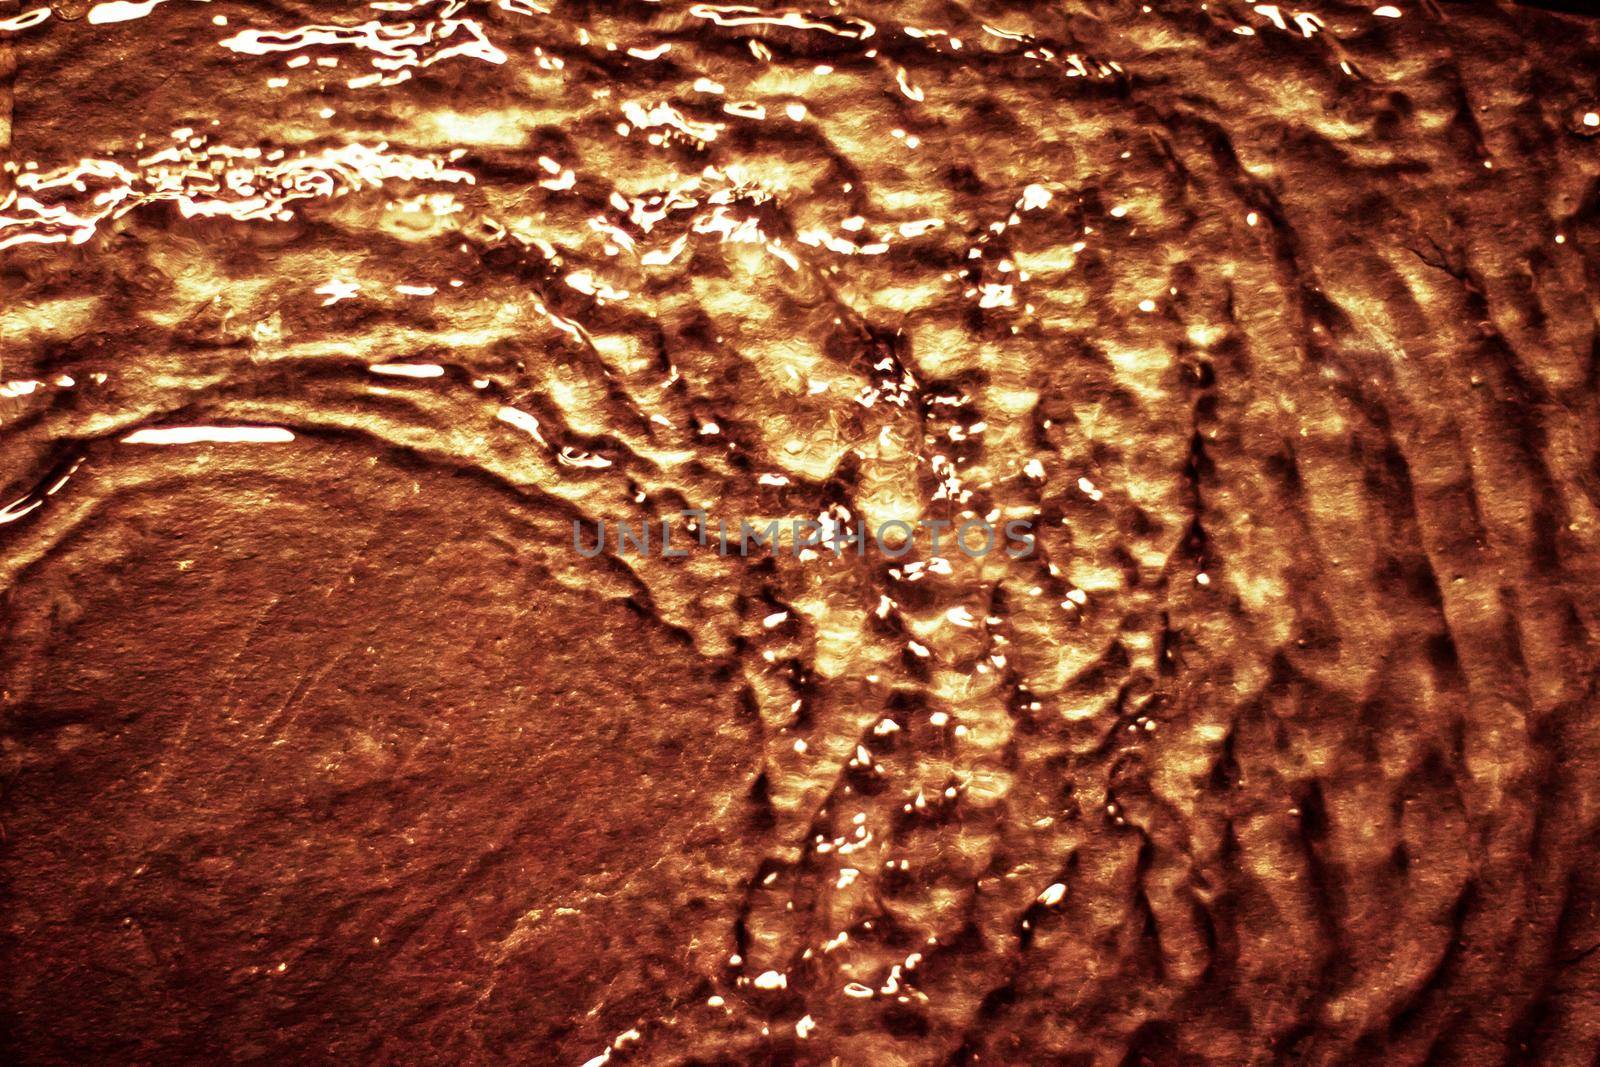 Flowing liquid on gold surface - luxury background and abstract design concept. Golden source